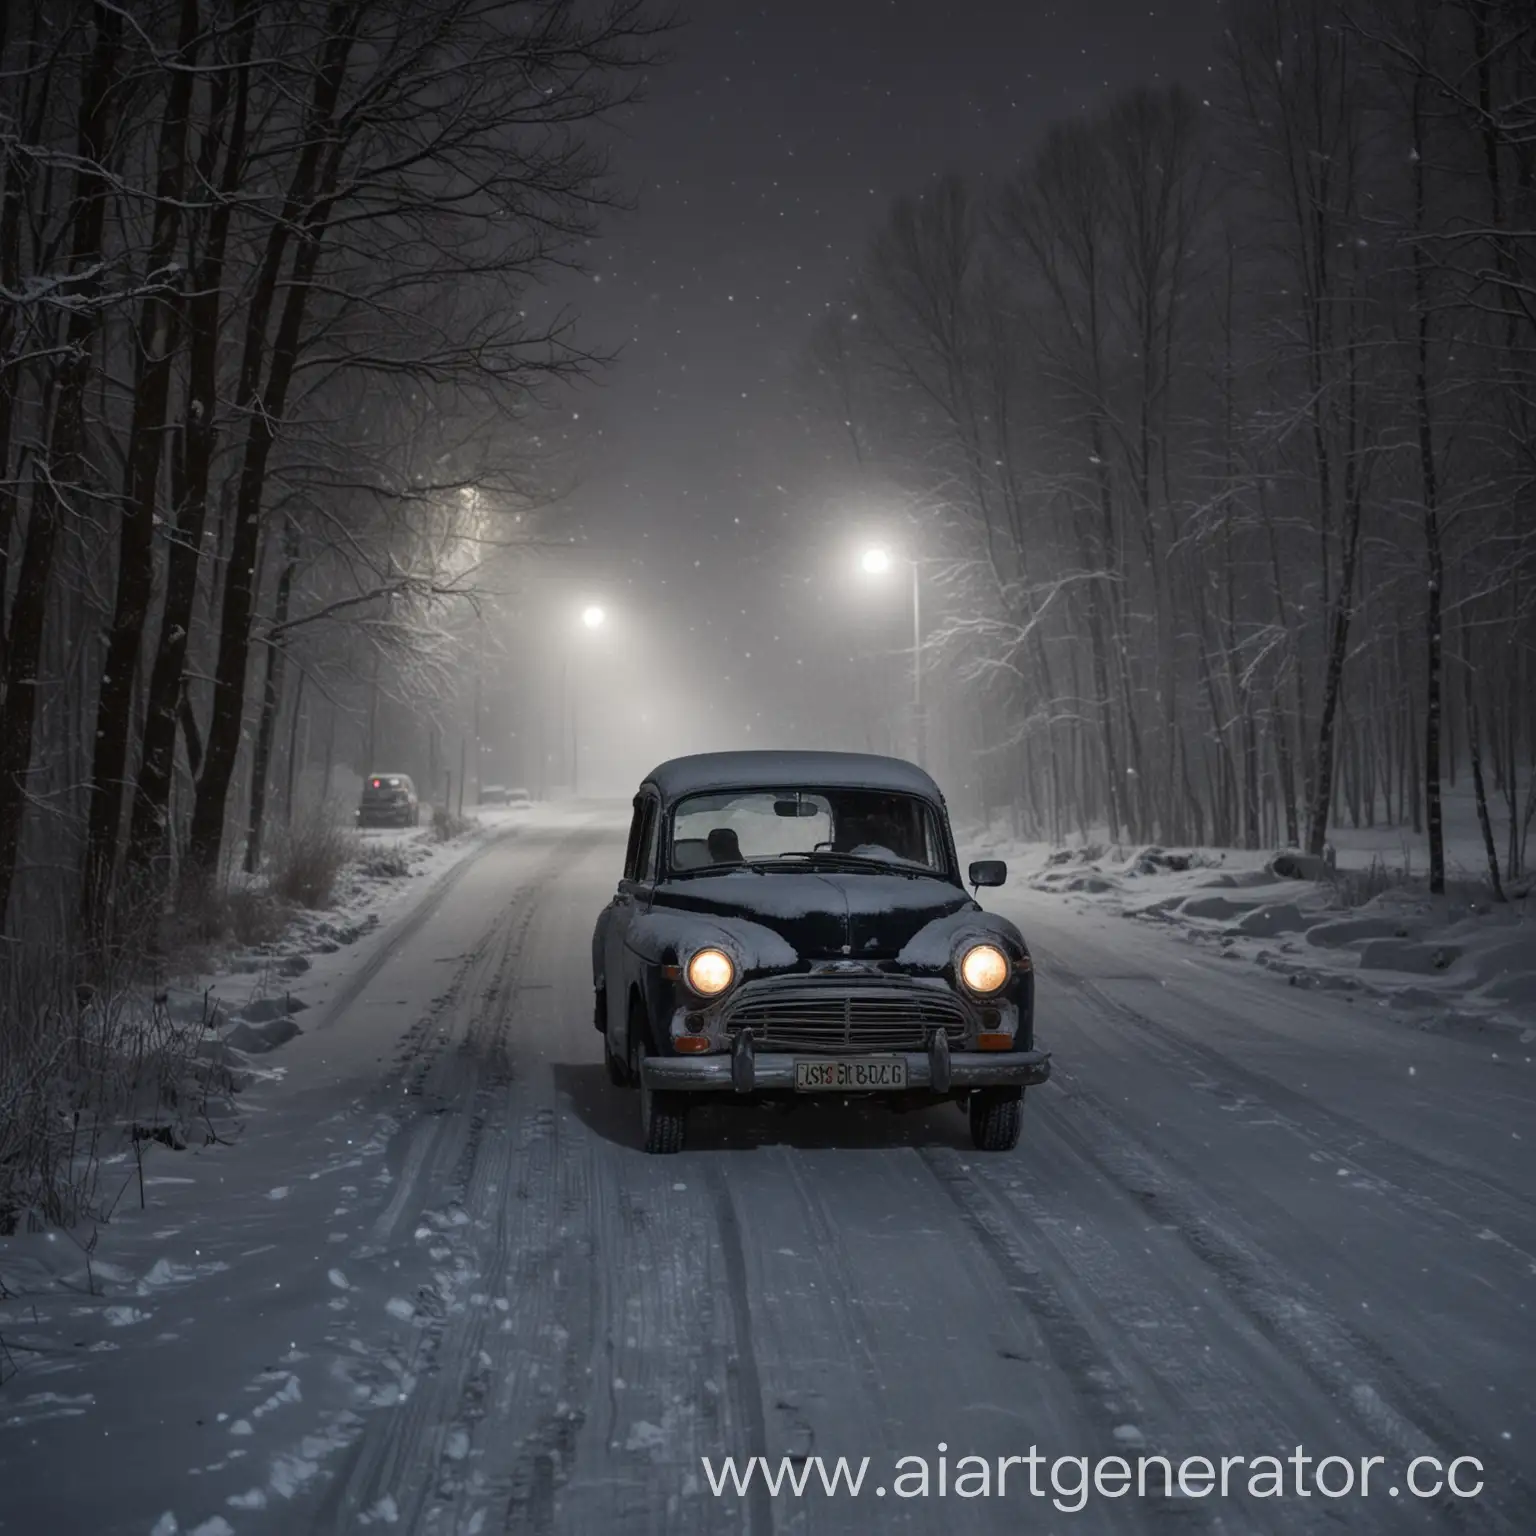 Snowy-Night-Drive-Old-Car-Journeying-Through-Winter-Village